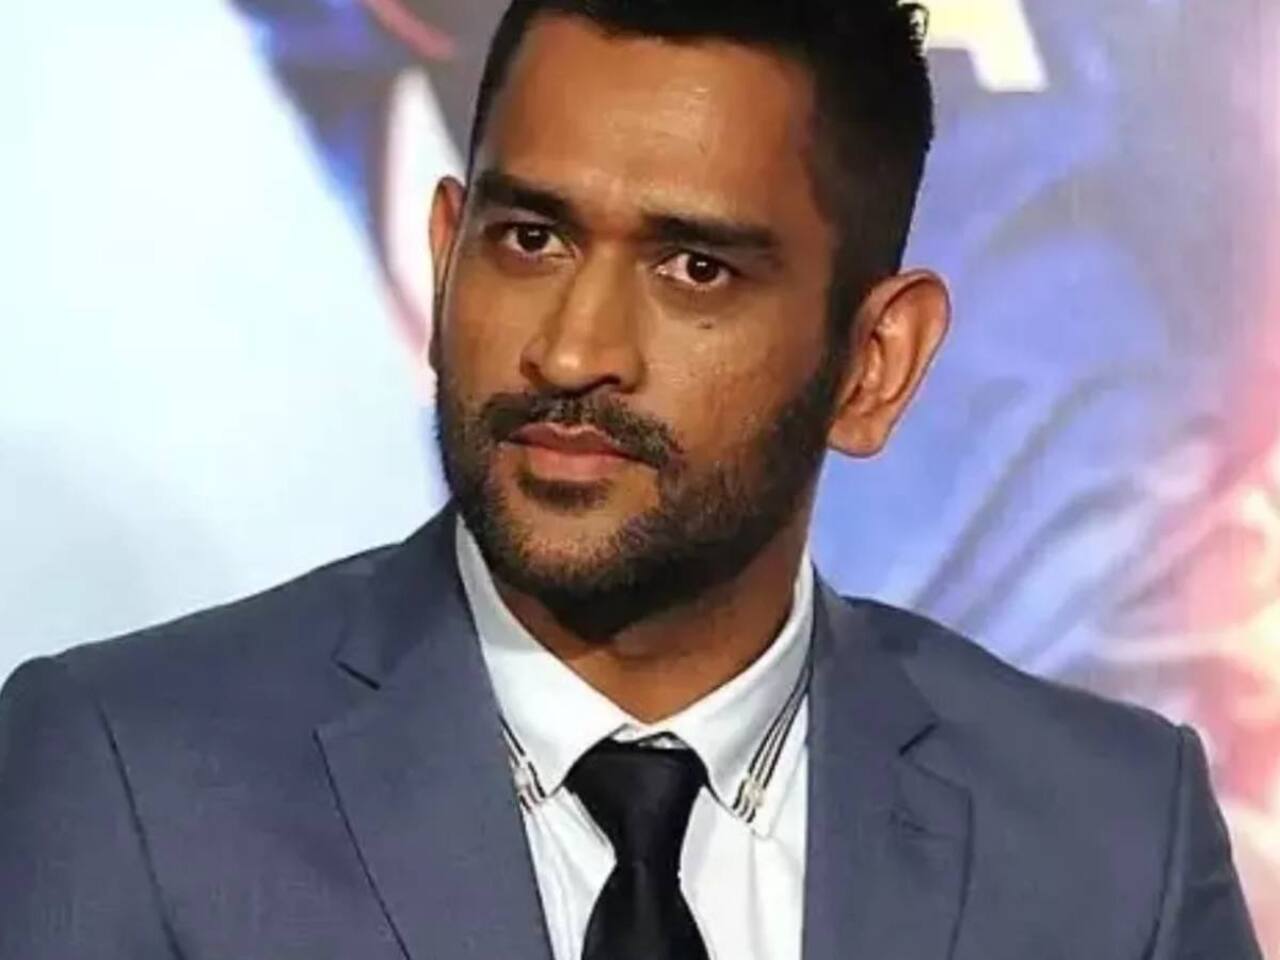 MS Dhoni turns film producer; announces Tamil debut film Let's Get Married with Harish Kalyan and Ivana